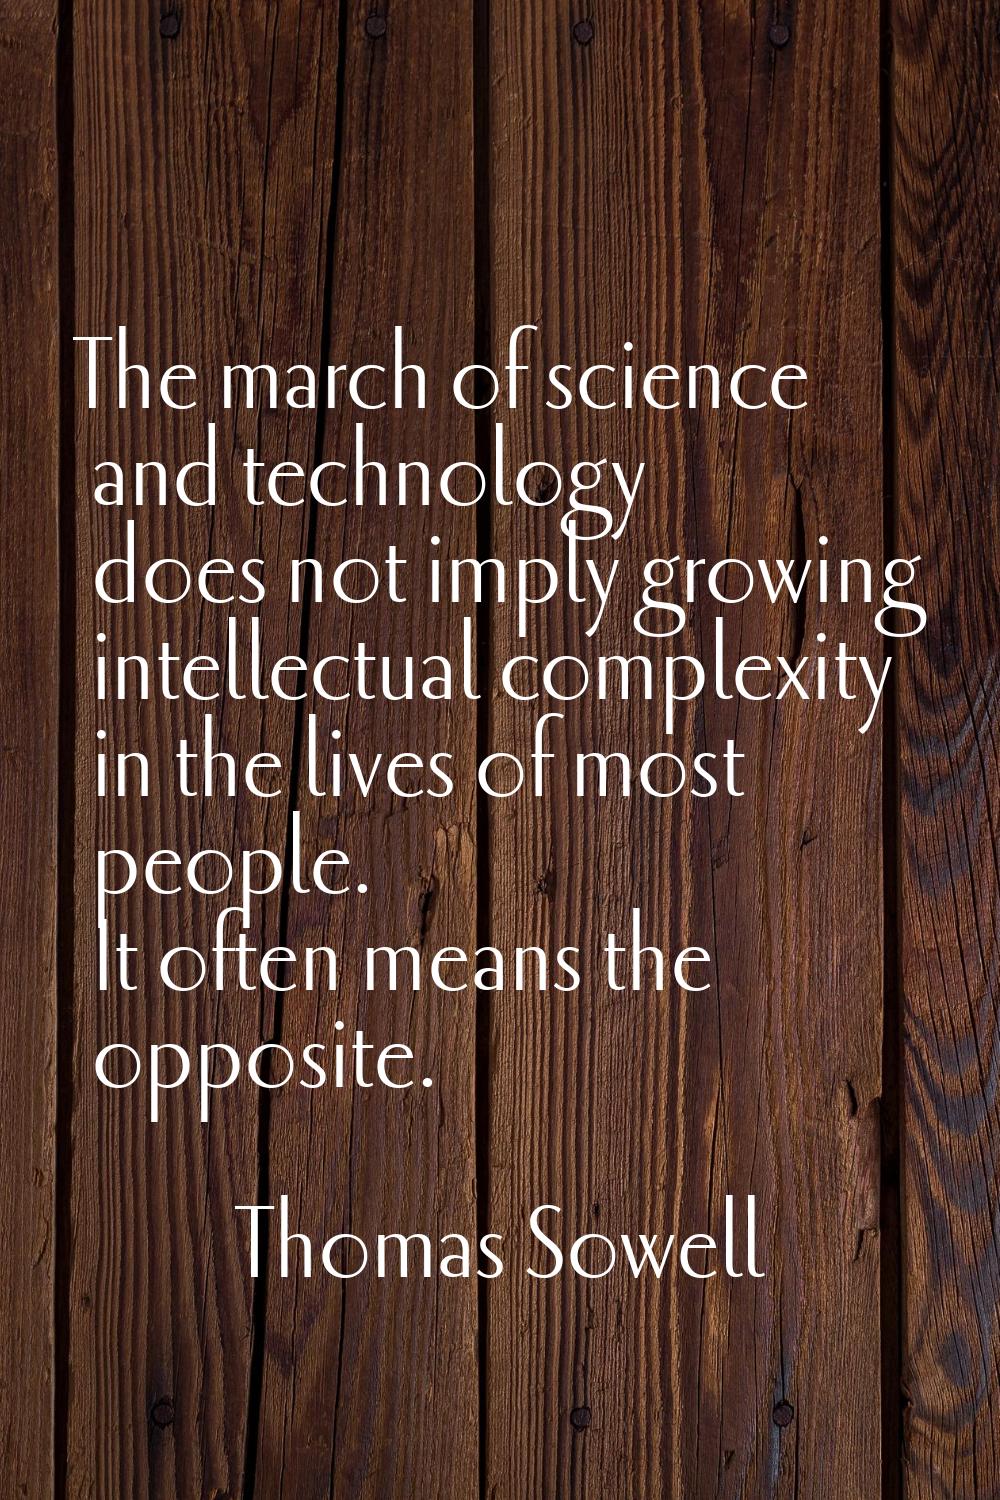 The march of science and technology does not imply growing intellectual complexity in the lives of 